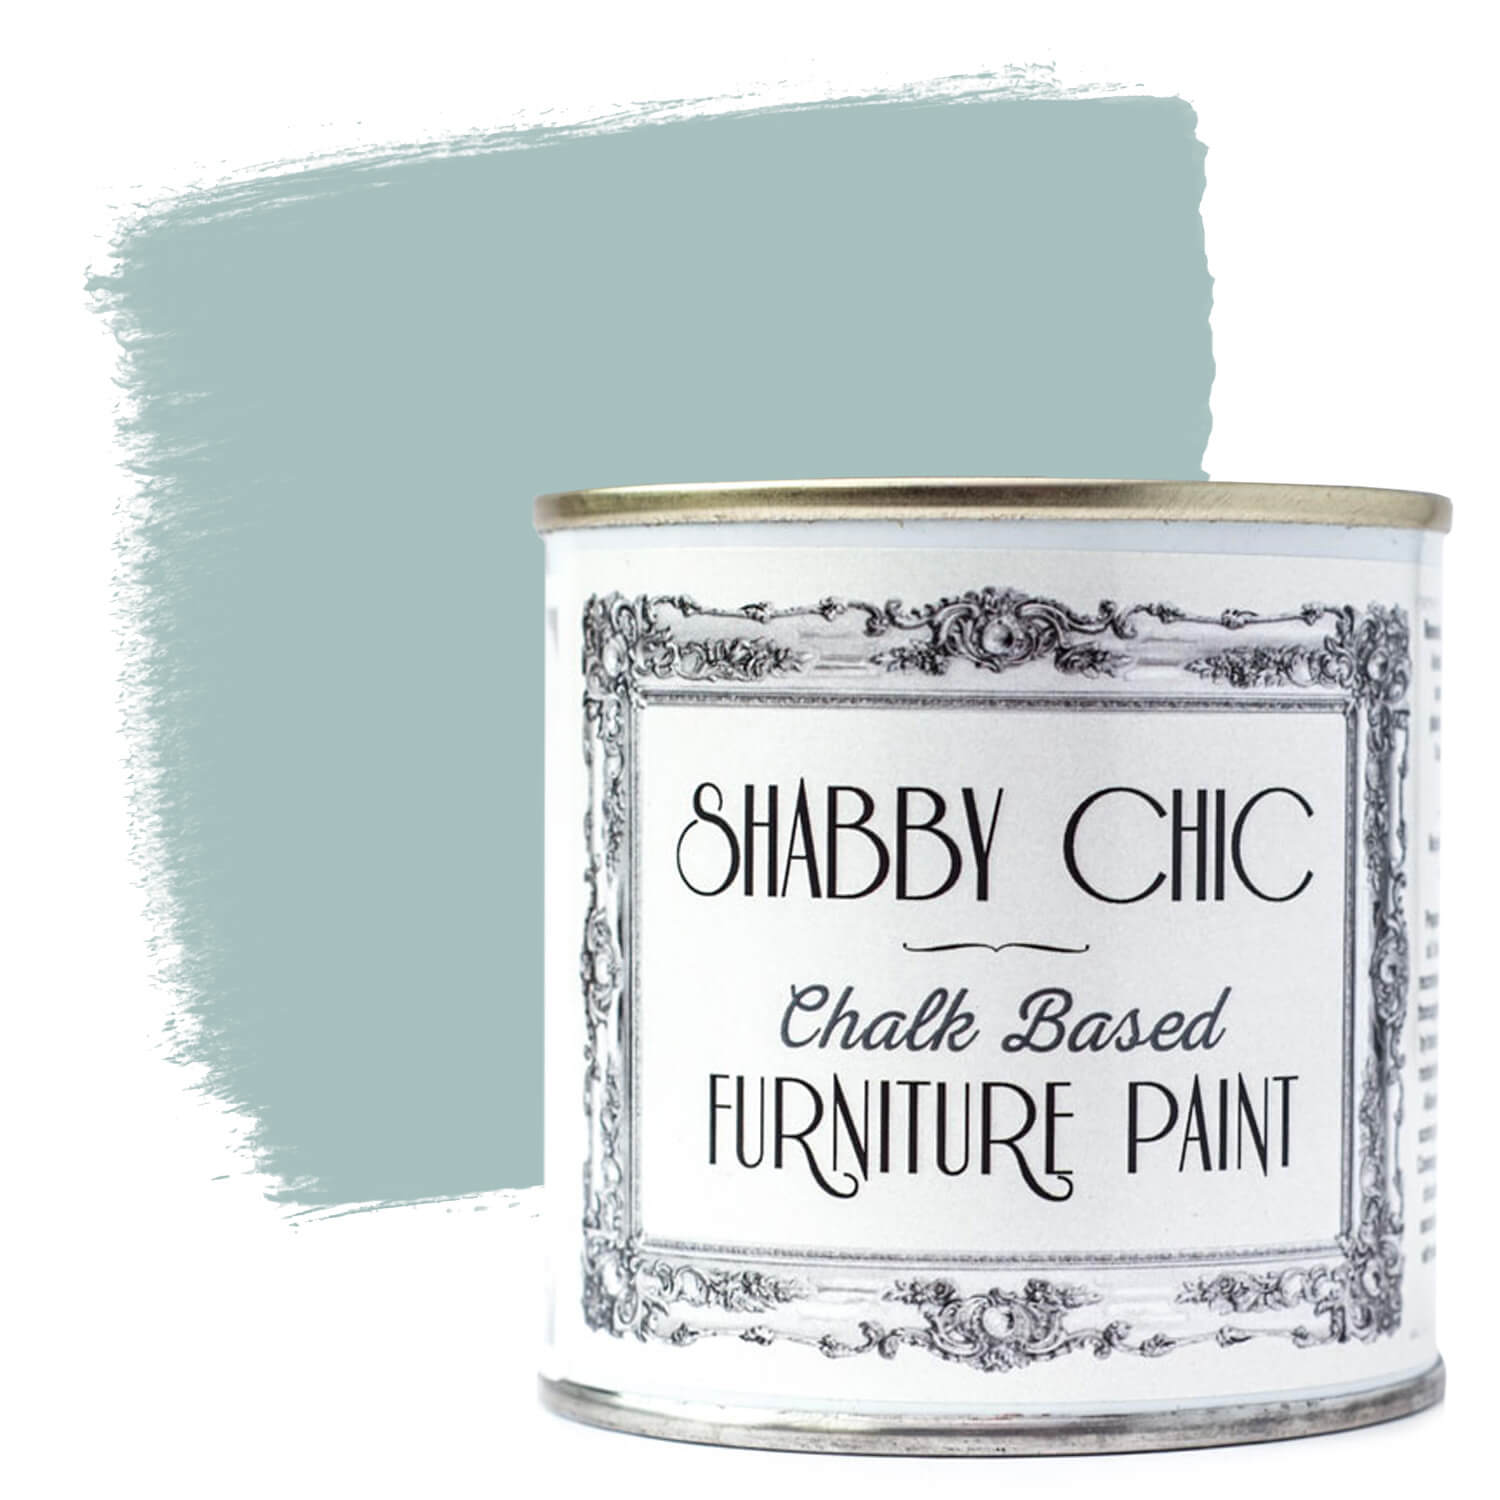 Shabby Chic Furniture Paint in Caesious